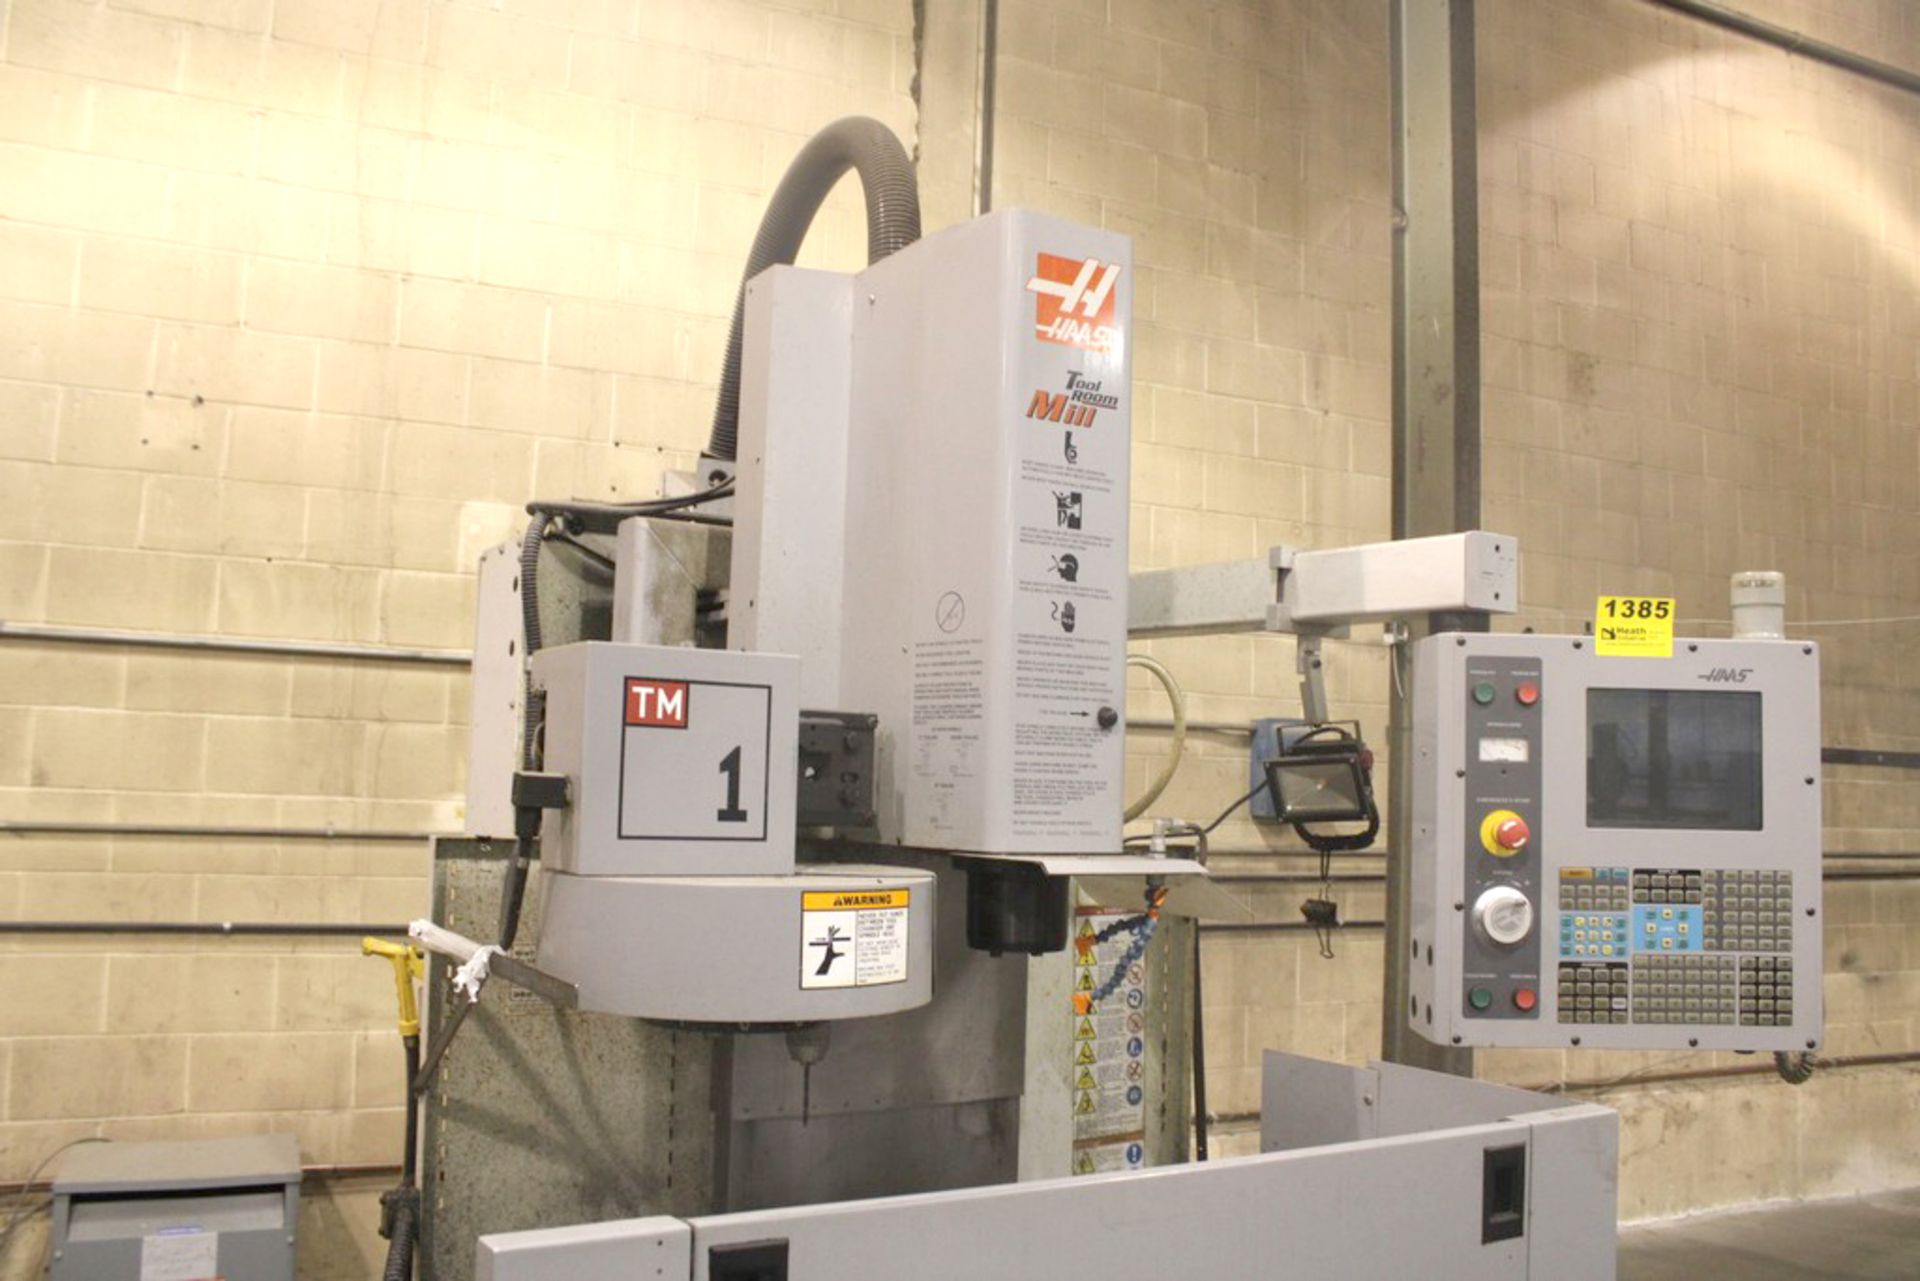 HAAS MODEL TM-1 CNC VERTICAL TOOL ROOM MILL, S/N 46006 (NEW 2005), 30” X-AXIS TRAVEL, 12” Y-AXIS - Image 2 of 9